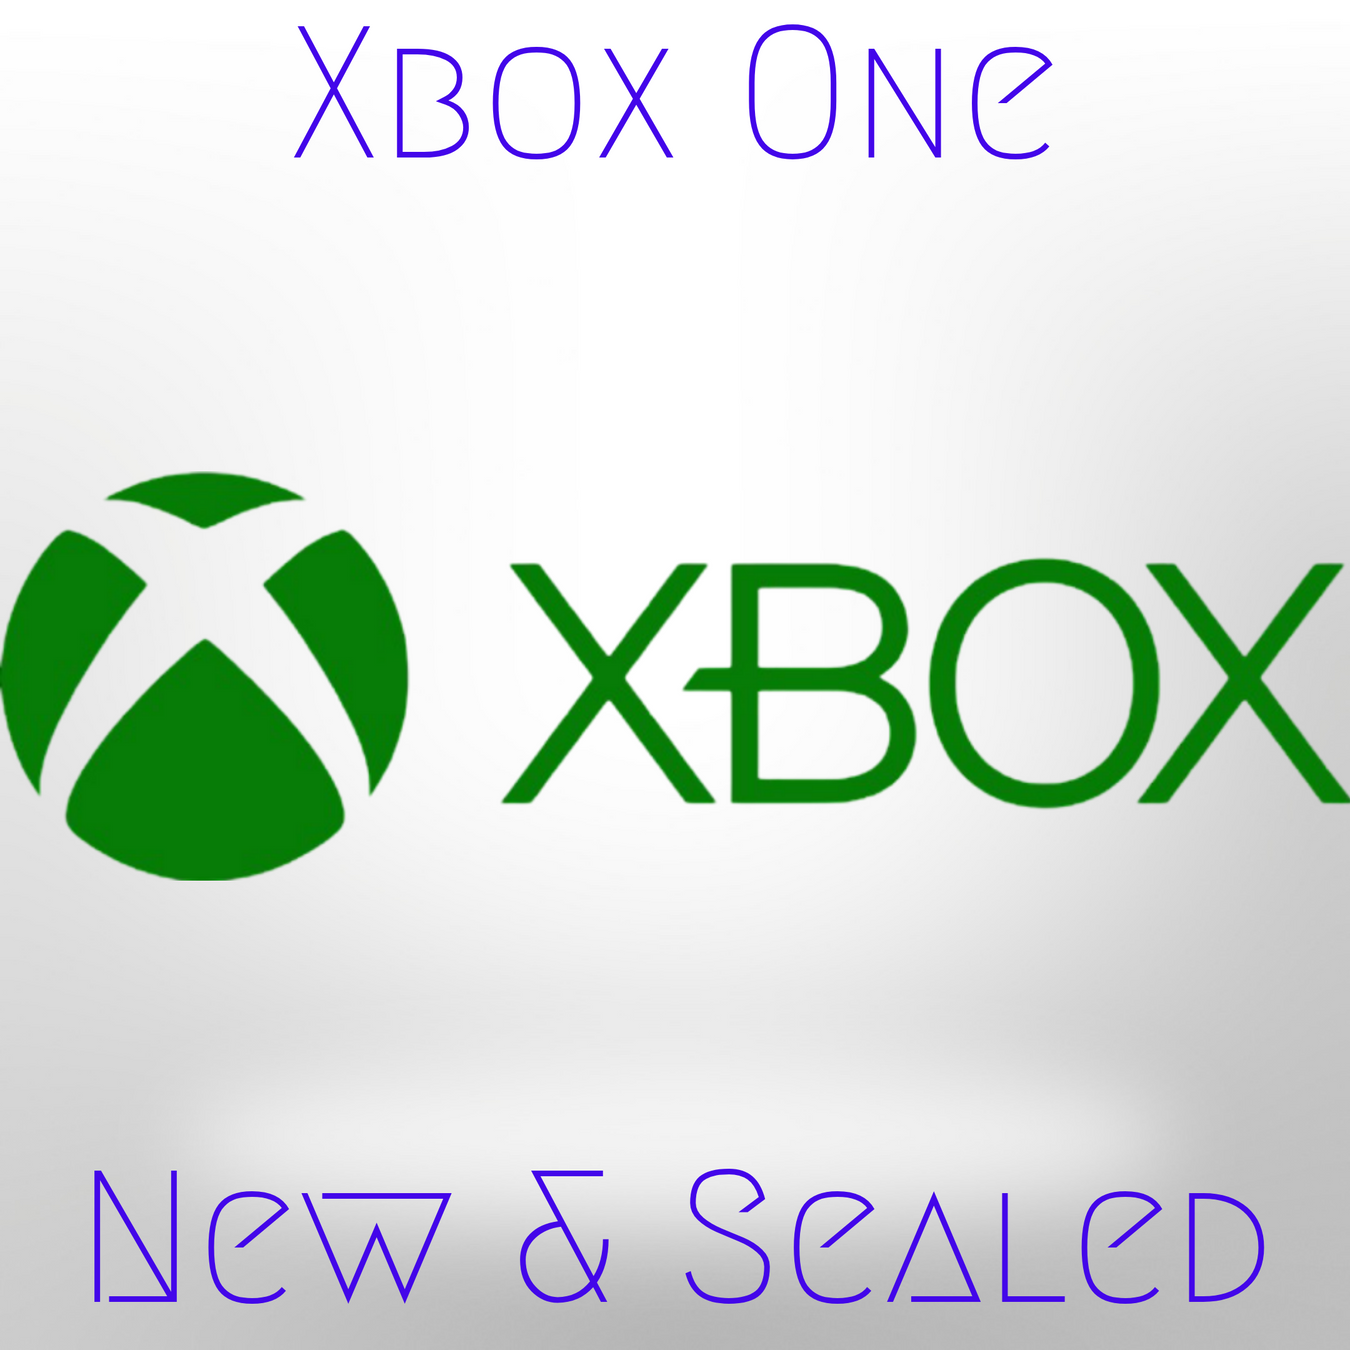 XBox One New & Sealed section